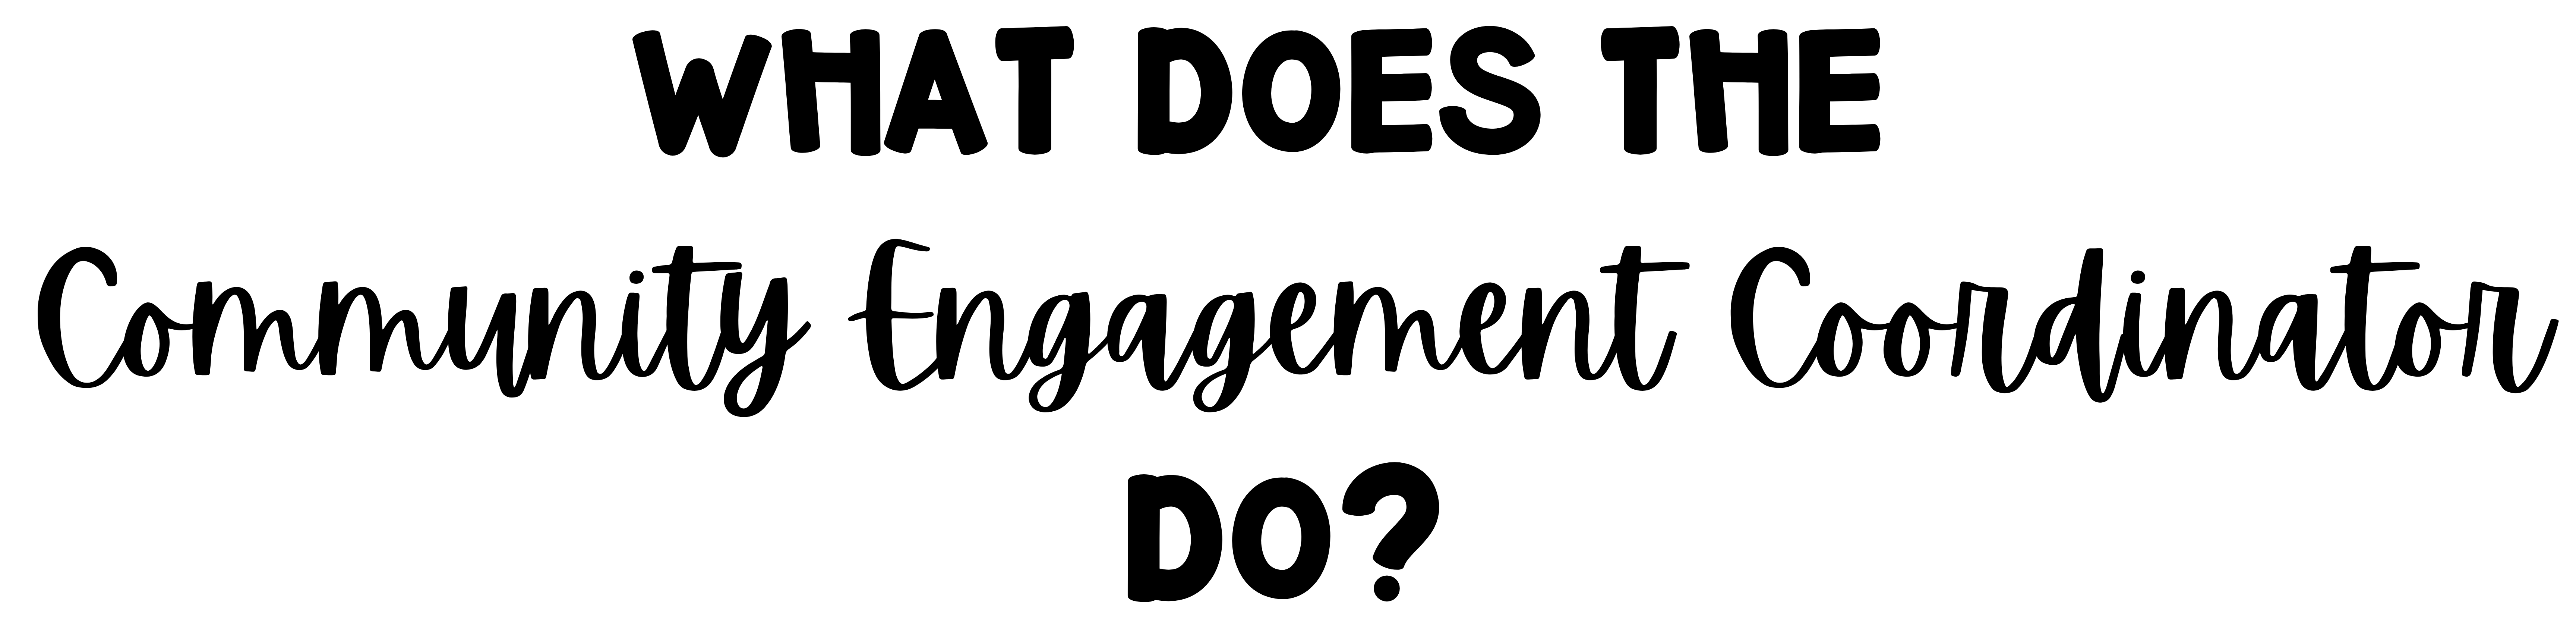 What does the Community Engagement Coordinator do?